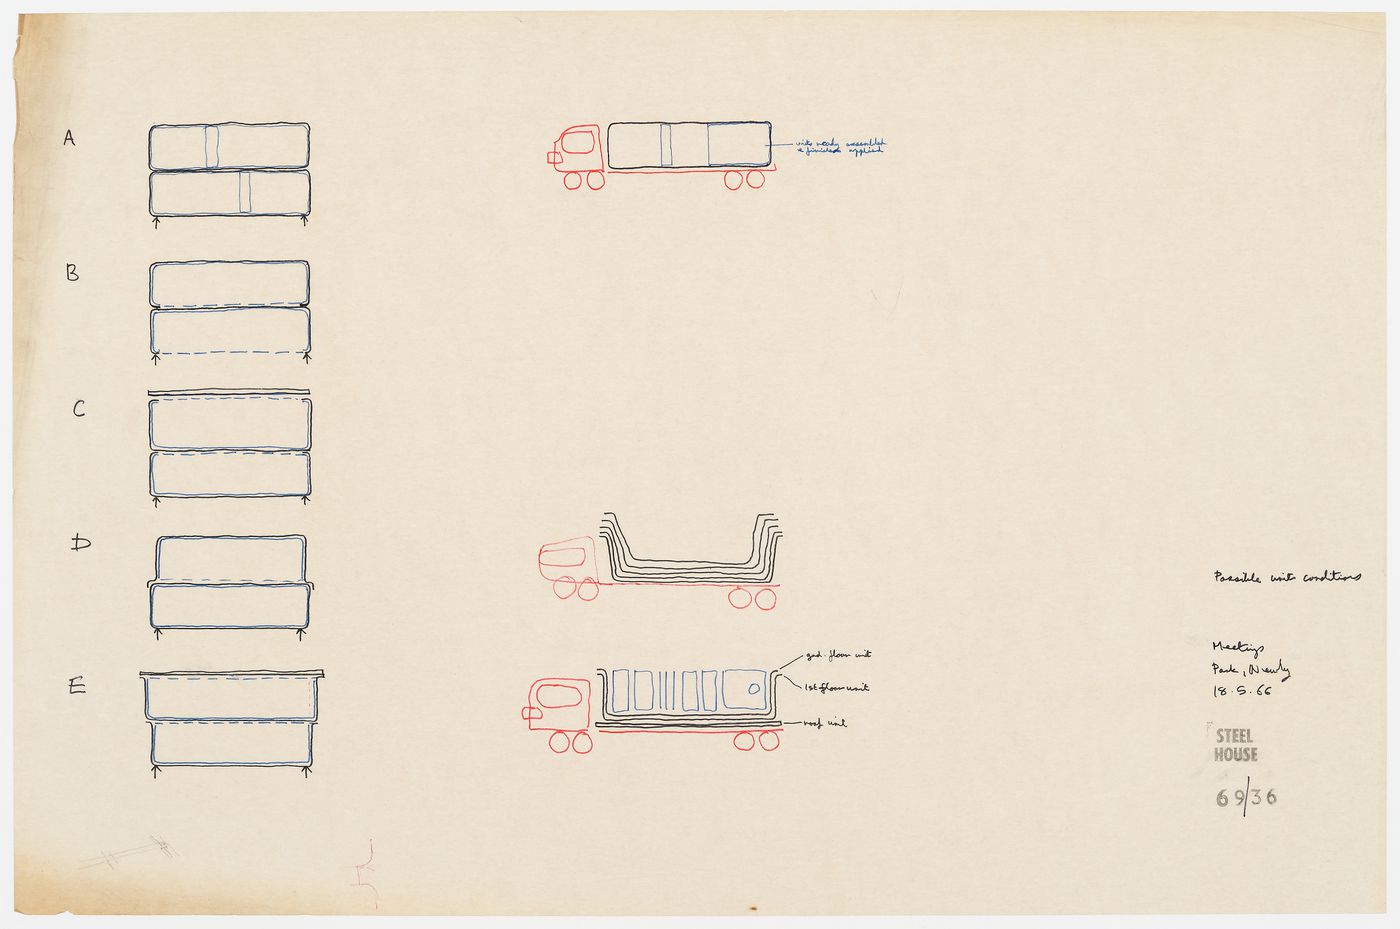 Steel House: sketches showing unit types and conditions for transport